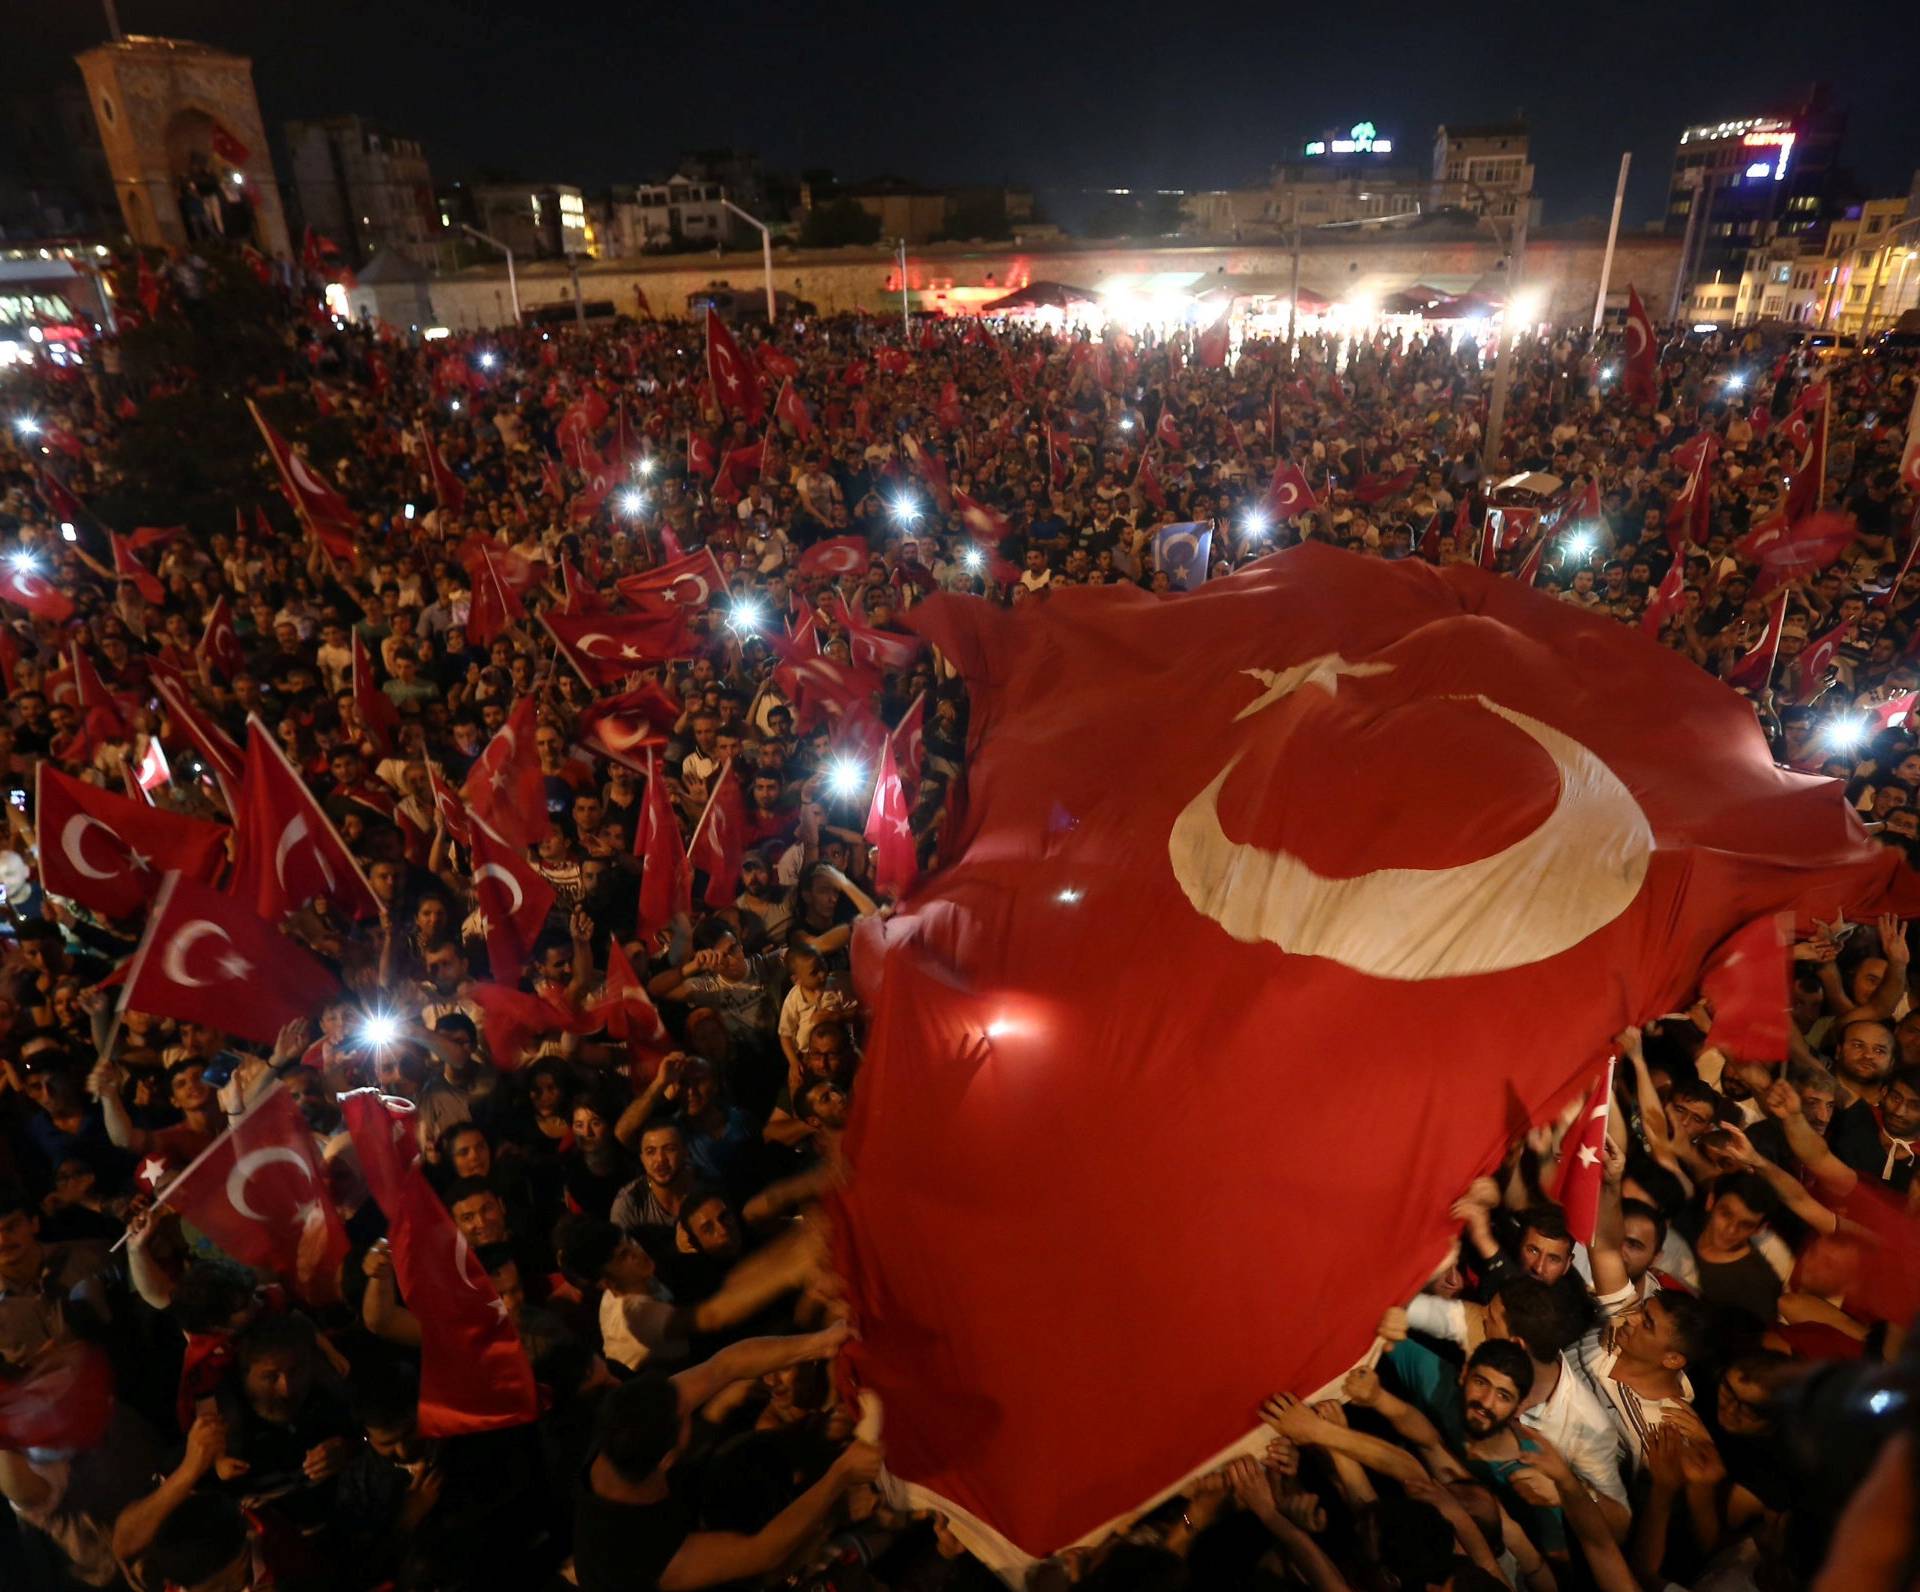 Supporters of Turkish President Erdogan wave national flags as they gather at Taksim Square in central Istanbul